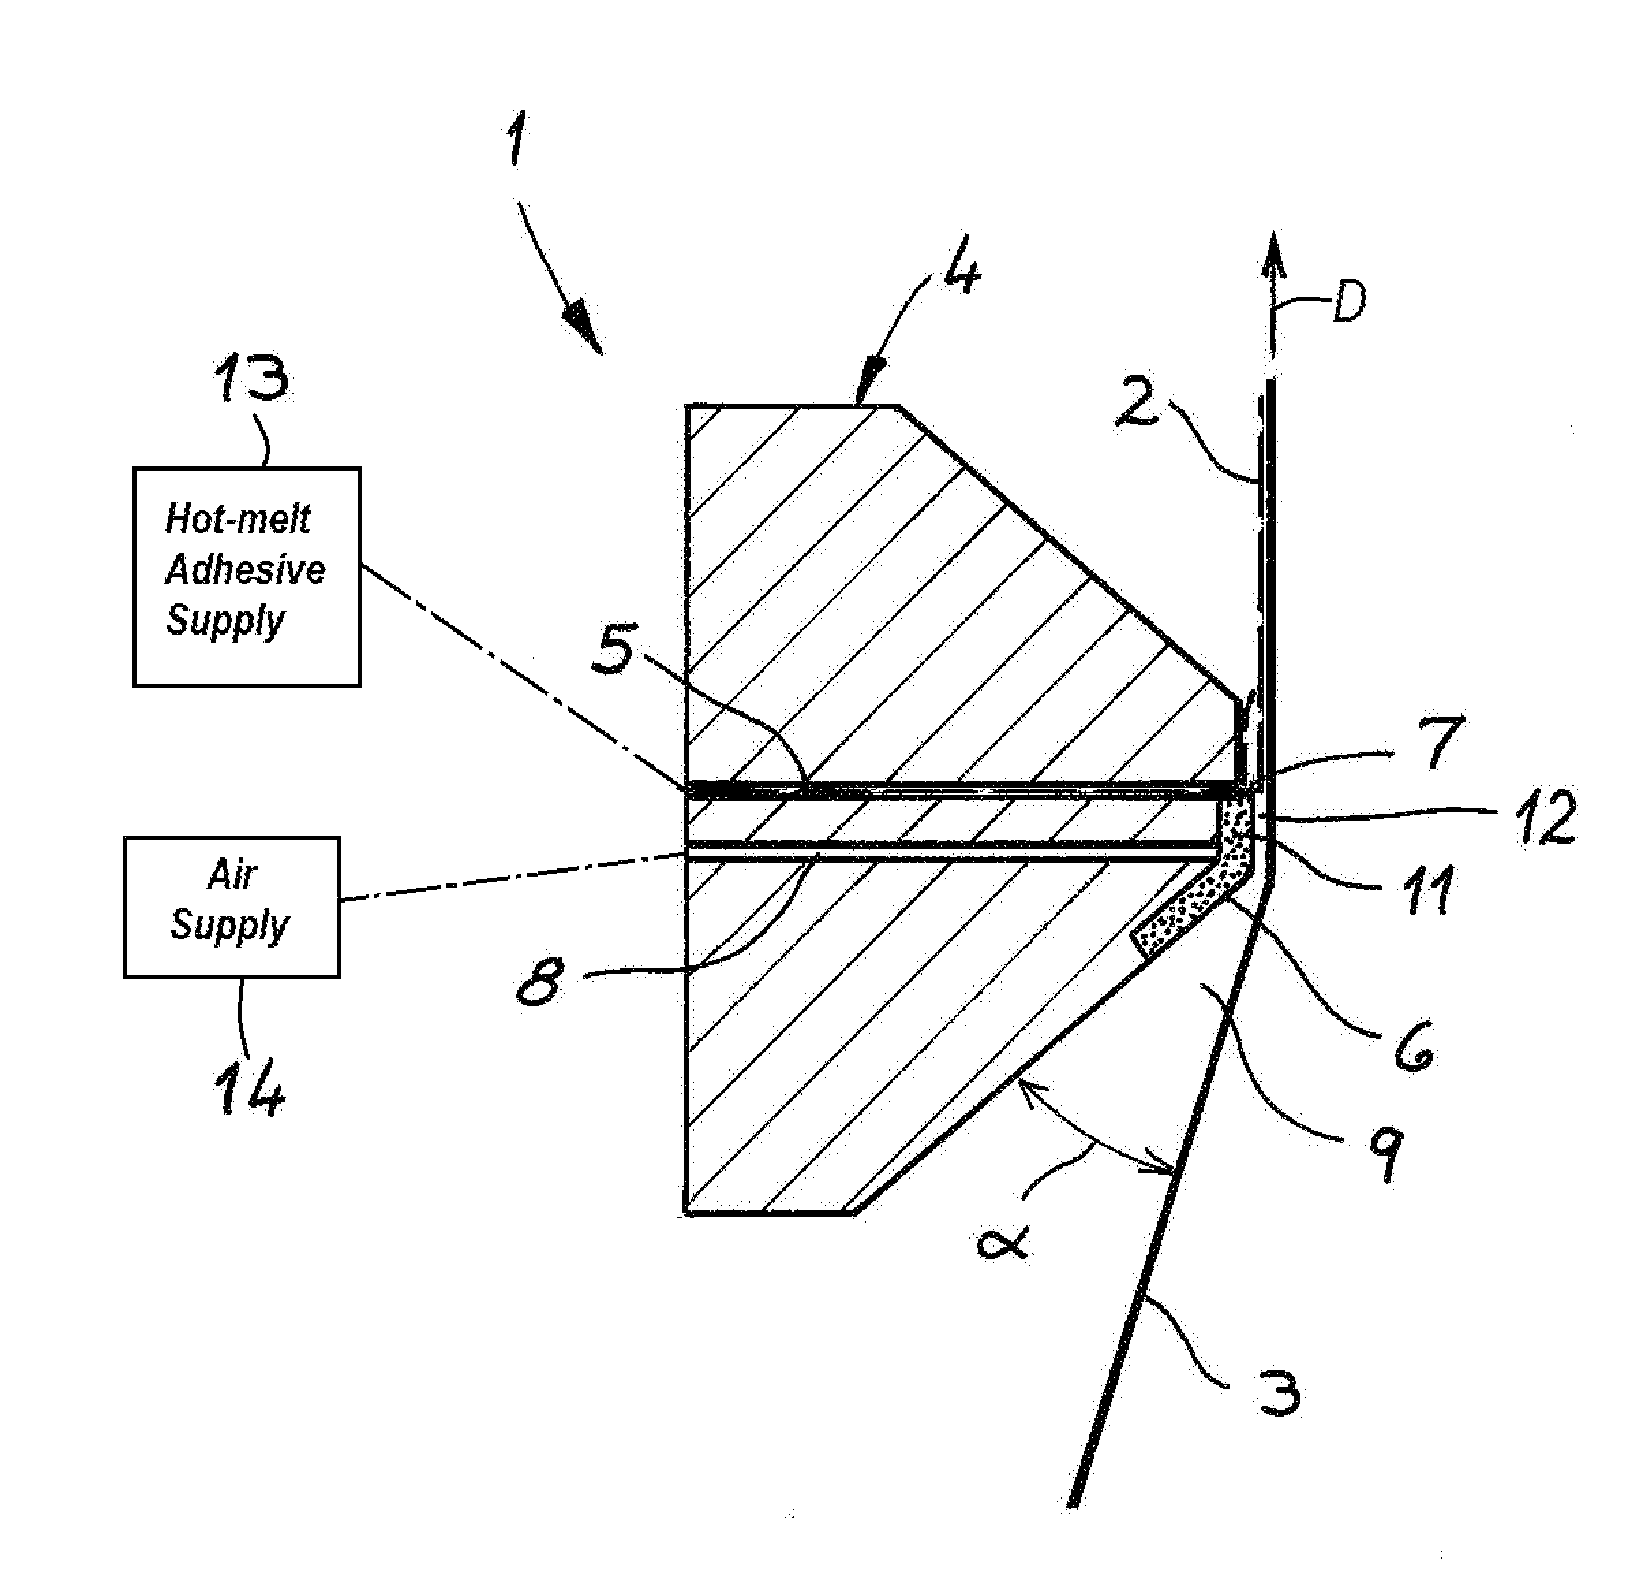 Self-cleaning nozzle for applying adhesive to a moving web